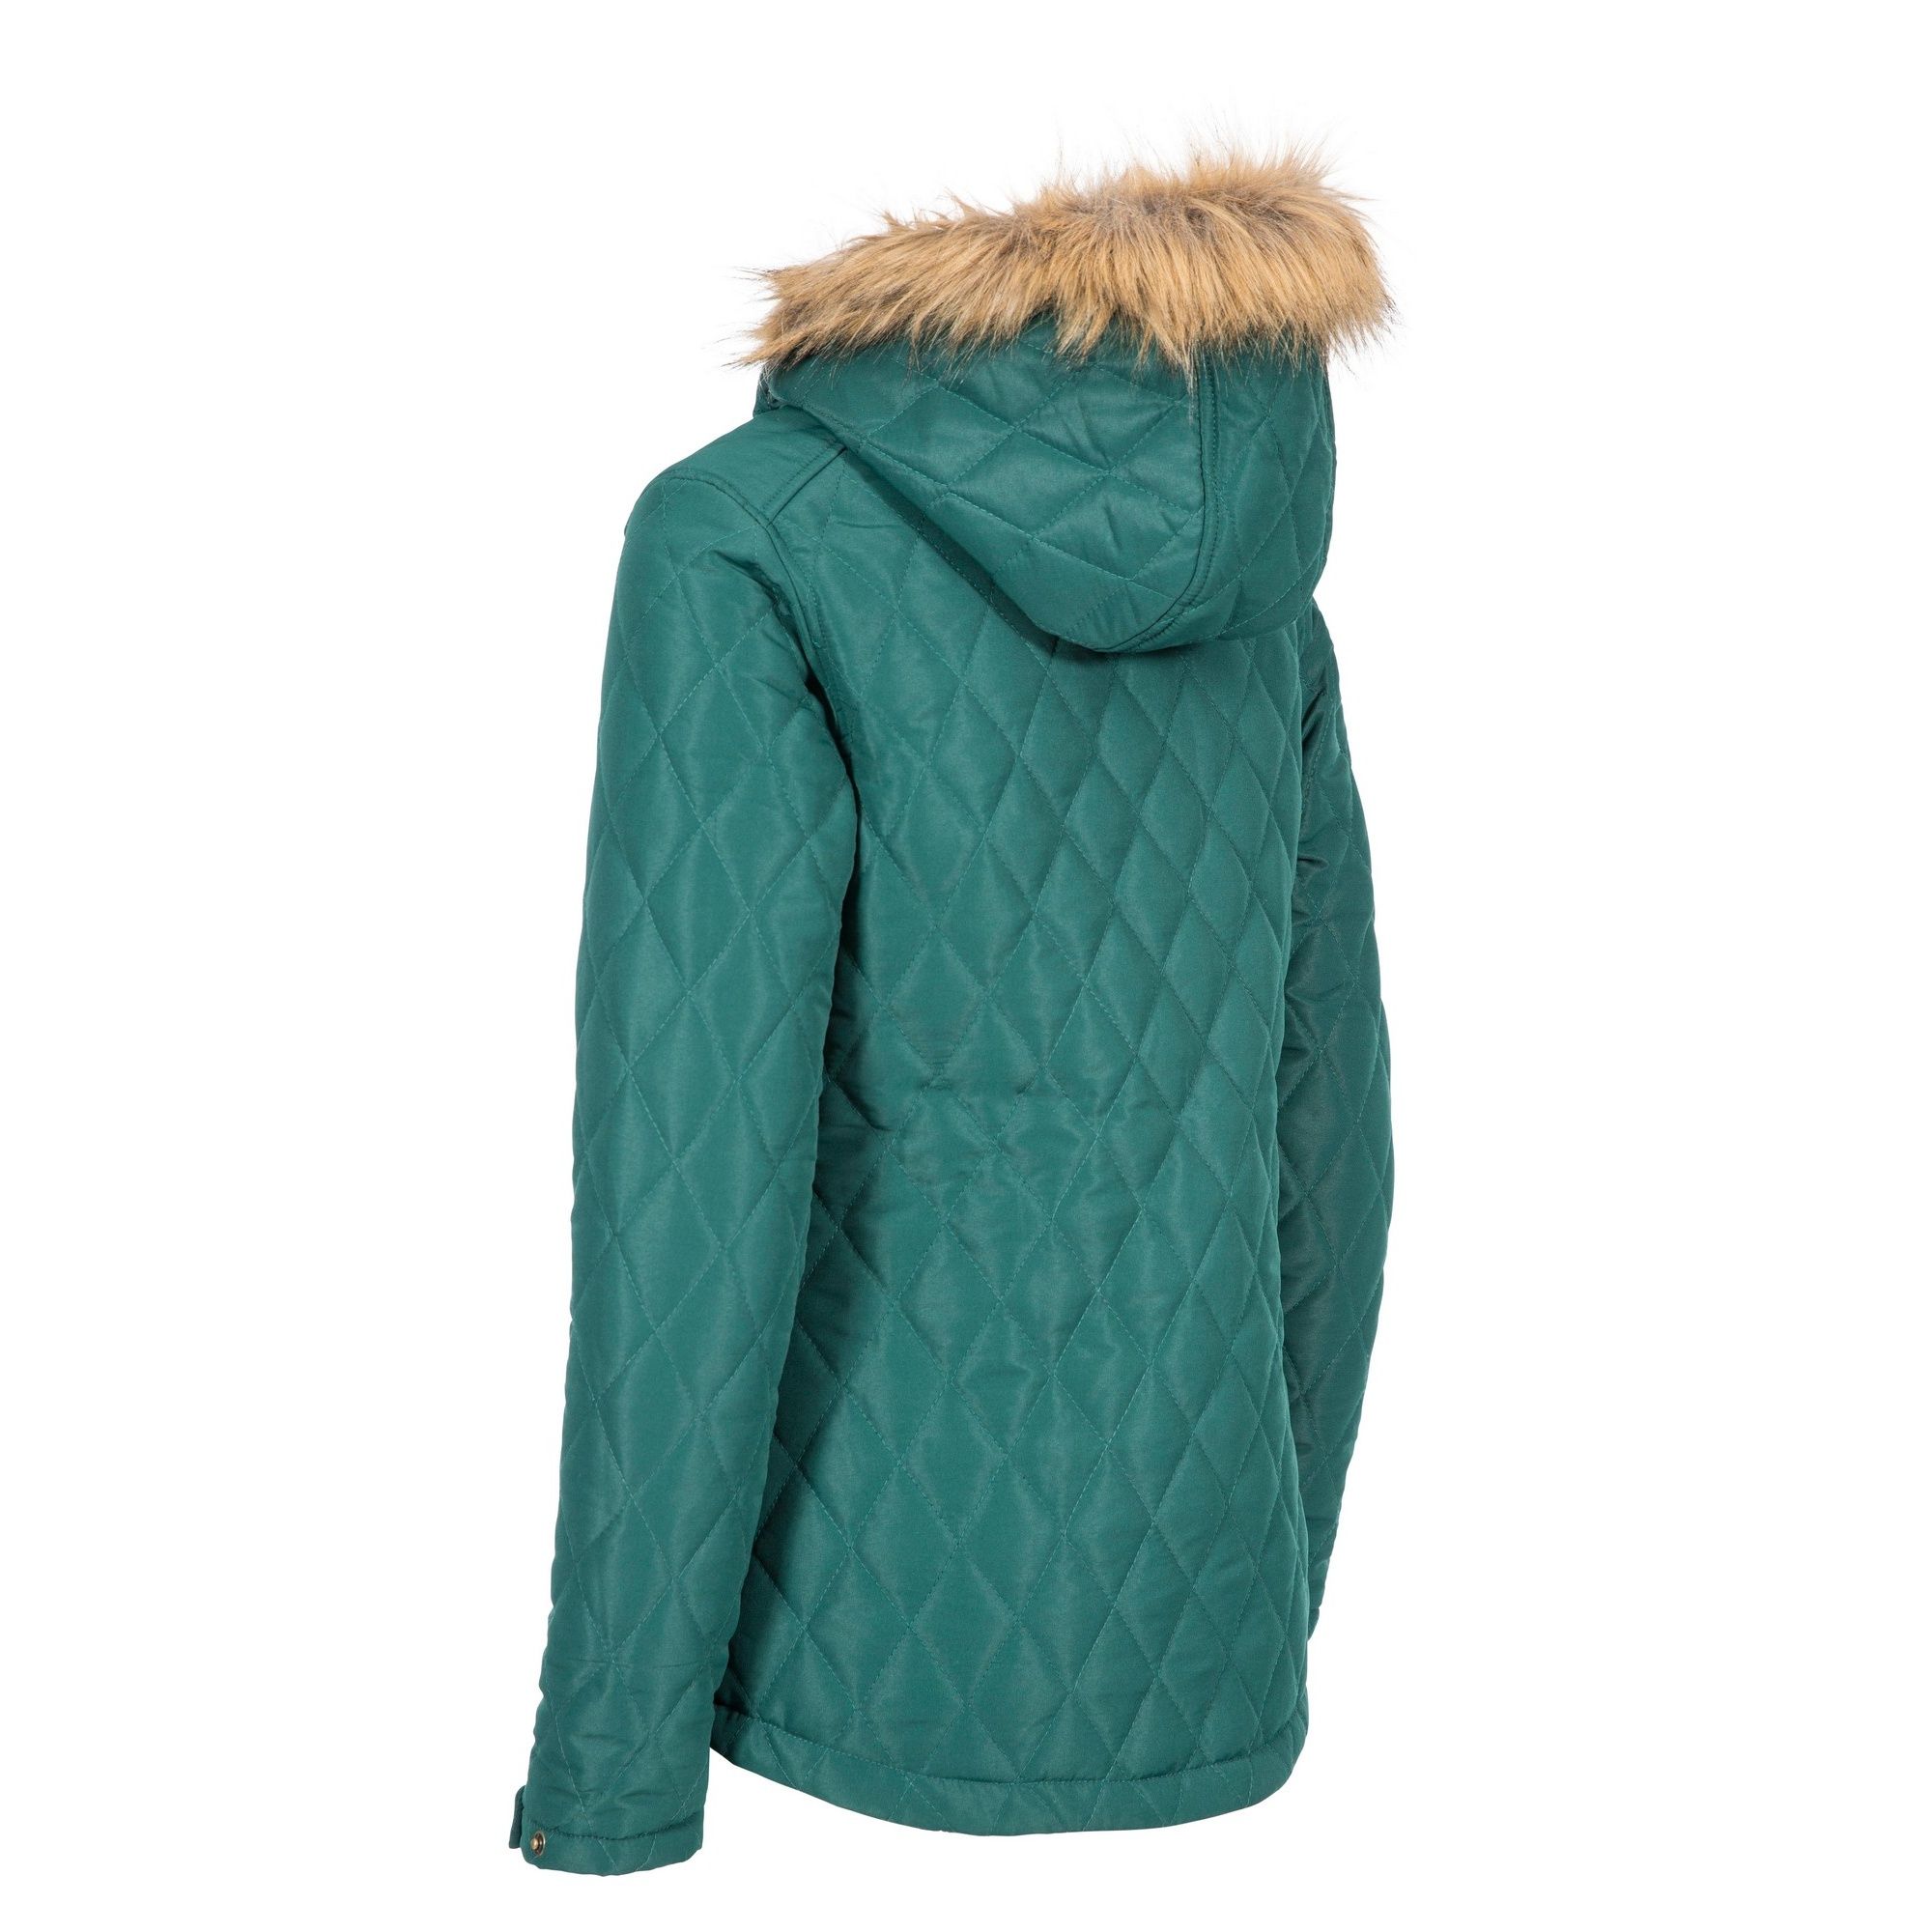 Padded. Diamond shaped quilting. 2 stud fastening waist pockets. Grown on hood with fur trim. Adjustable stud cuff. Inner storm flap. Shell: 100% Polyester, Lining: 100% Polyester, Filling: 100% Polyester. Trespass Womens Chest Sizing (approx): XS/8 - 32in/81cm, S/10 - 34in/86cm, M/12 - 36in/91.4cm, L/14 - 38in/96.5cm, XL/16 - 40in/101.5cm, XXL/18 - 42in/106.5cm.